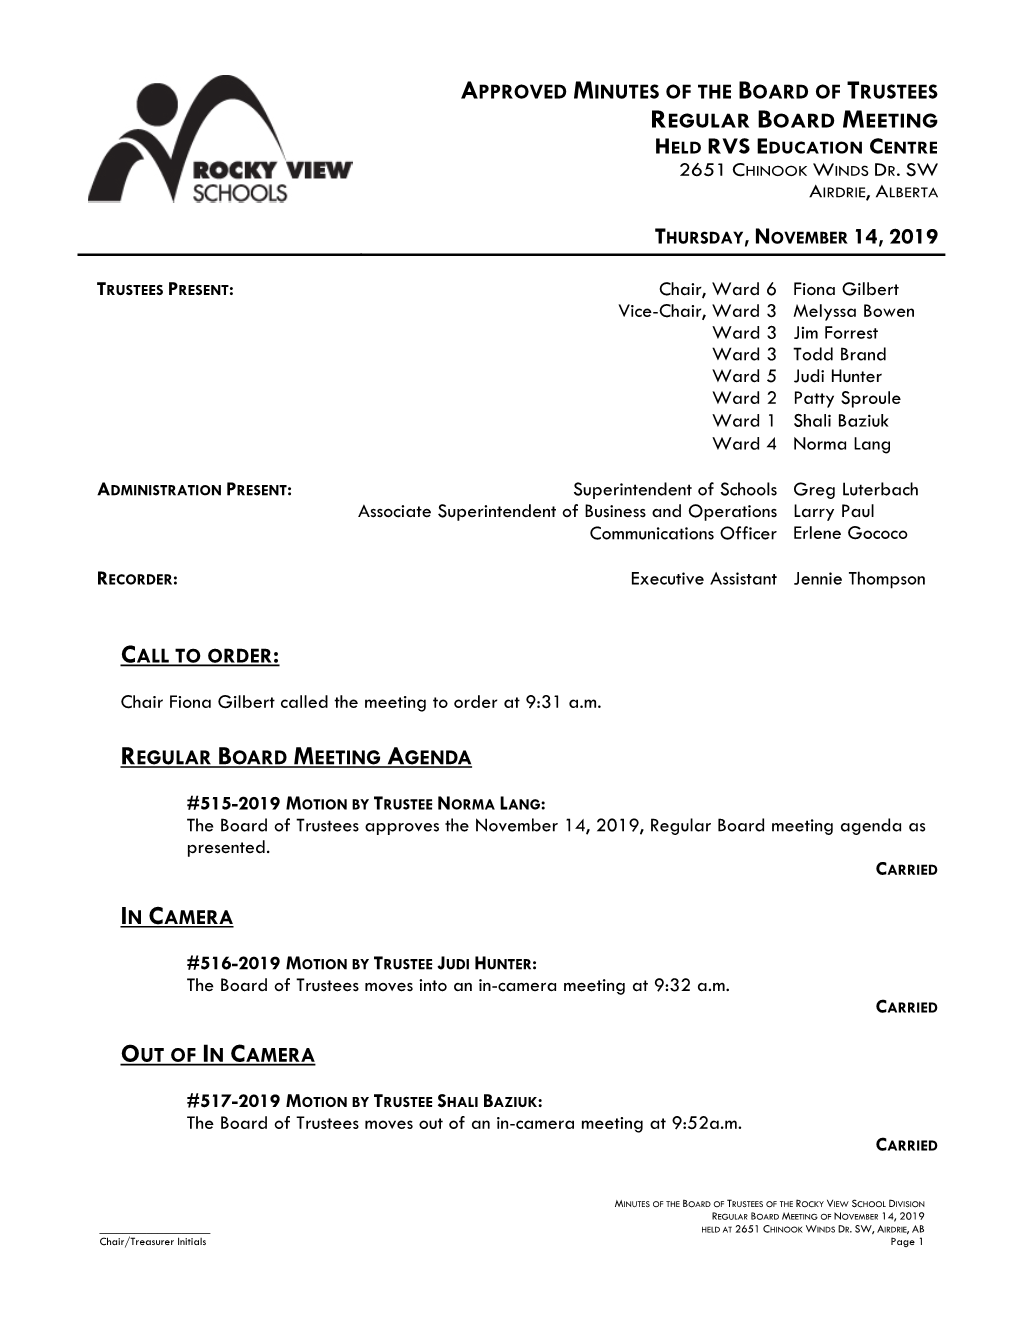 Approved Minutes of the Board of Trustees Regular Board Meeting Held Rvs Education Centre 2651 Chinook Winds Dr